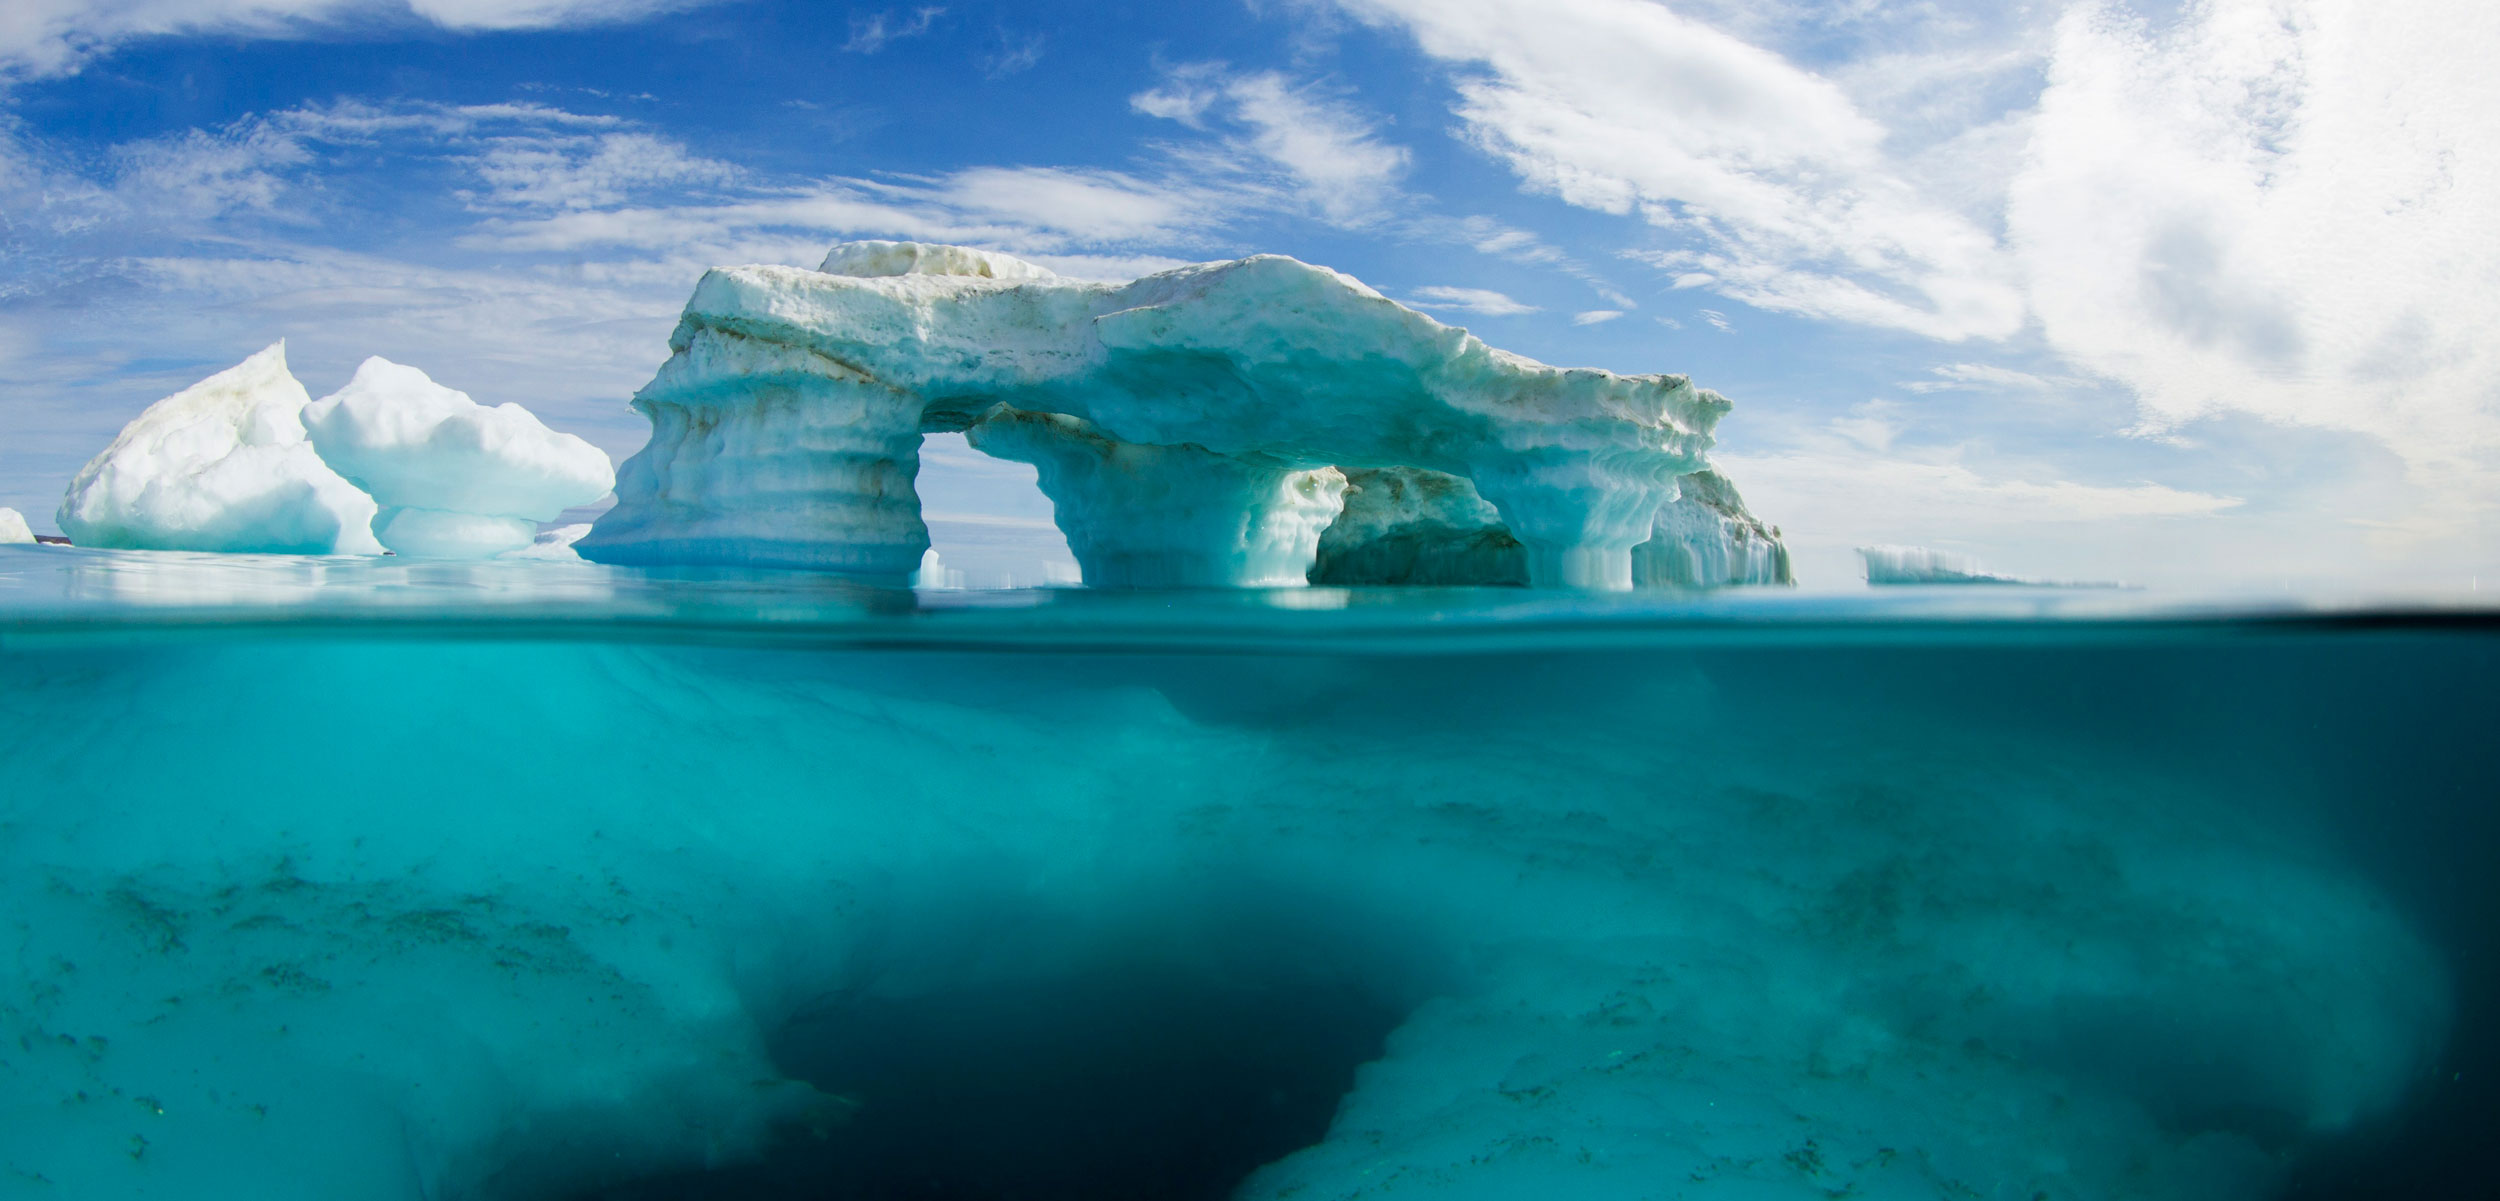 Underwater view of melting iceberg in Harbour Islands on Hudson Bay just south of arctic circle, Repulse Bay, Nunavut Territory, Canada